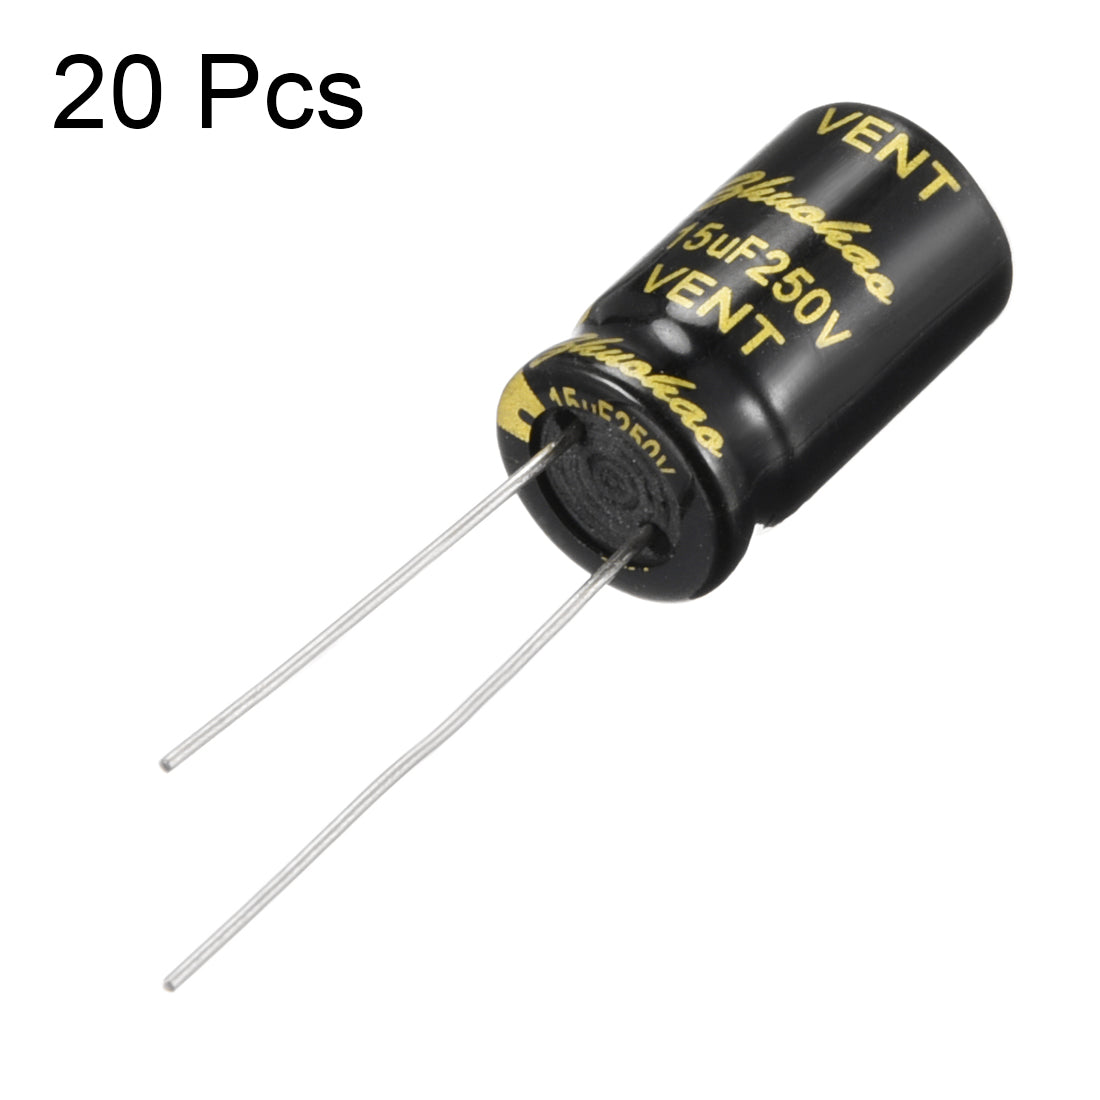 uxcell Uxcell Aluminum Radial Electrolytic Capacitor with 15uF 250V 105 Celsius Life 2000H 10 x 17 mm Black 20pcs